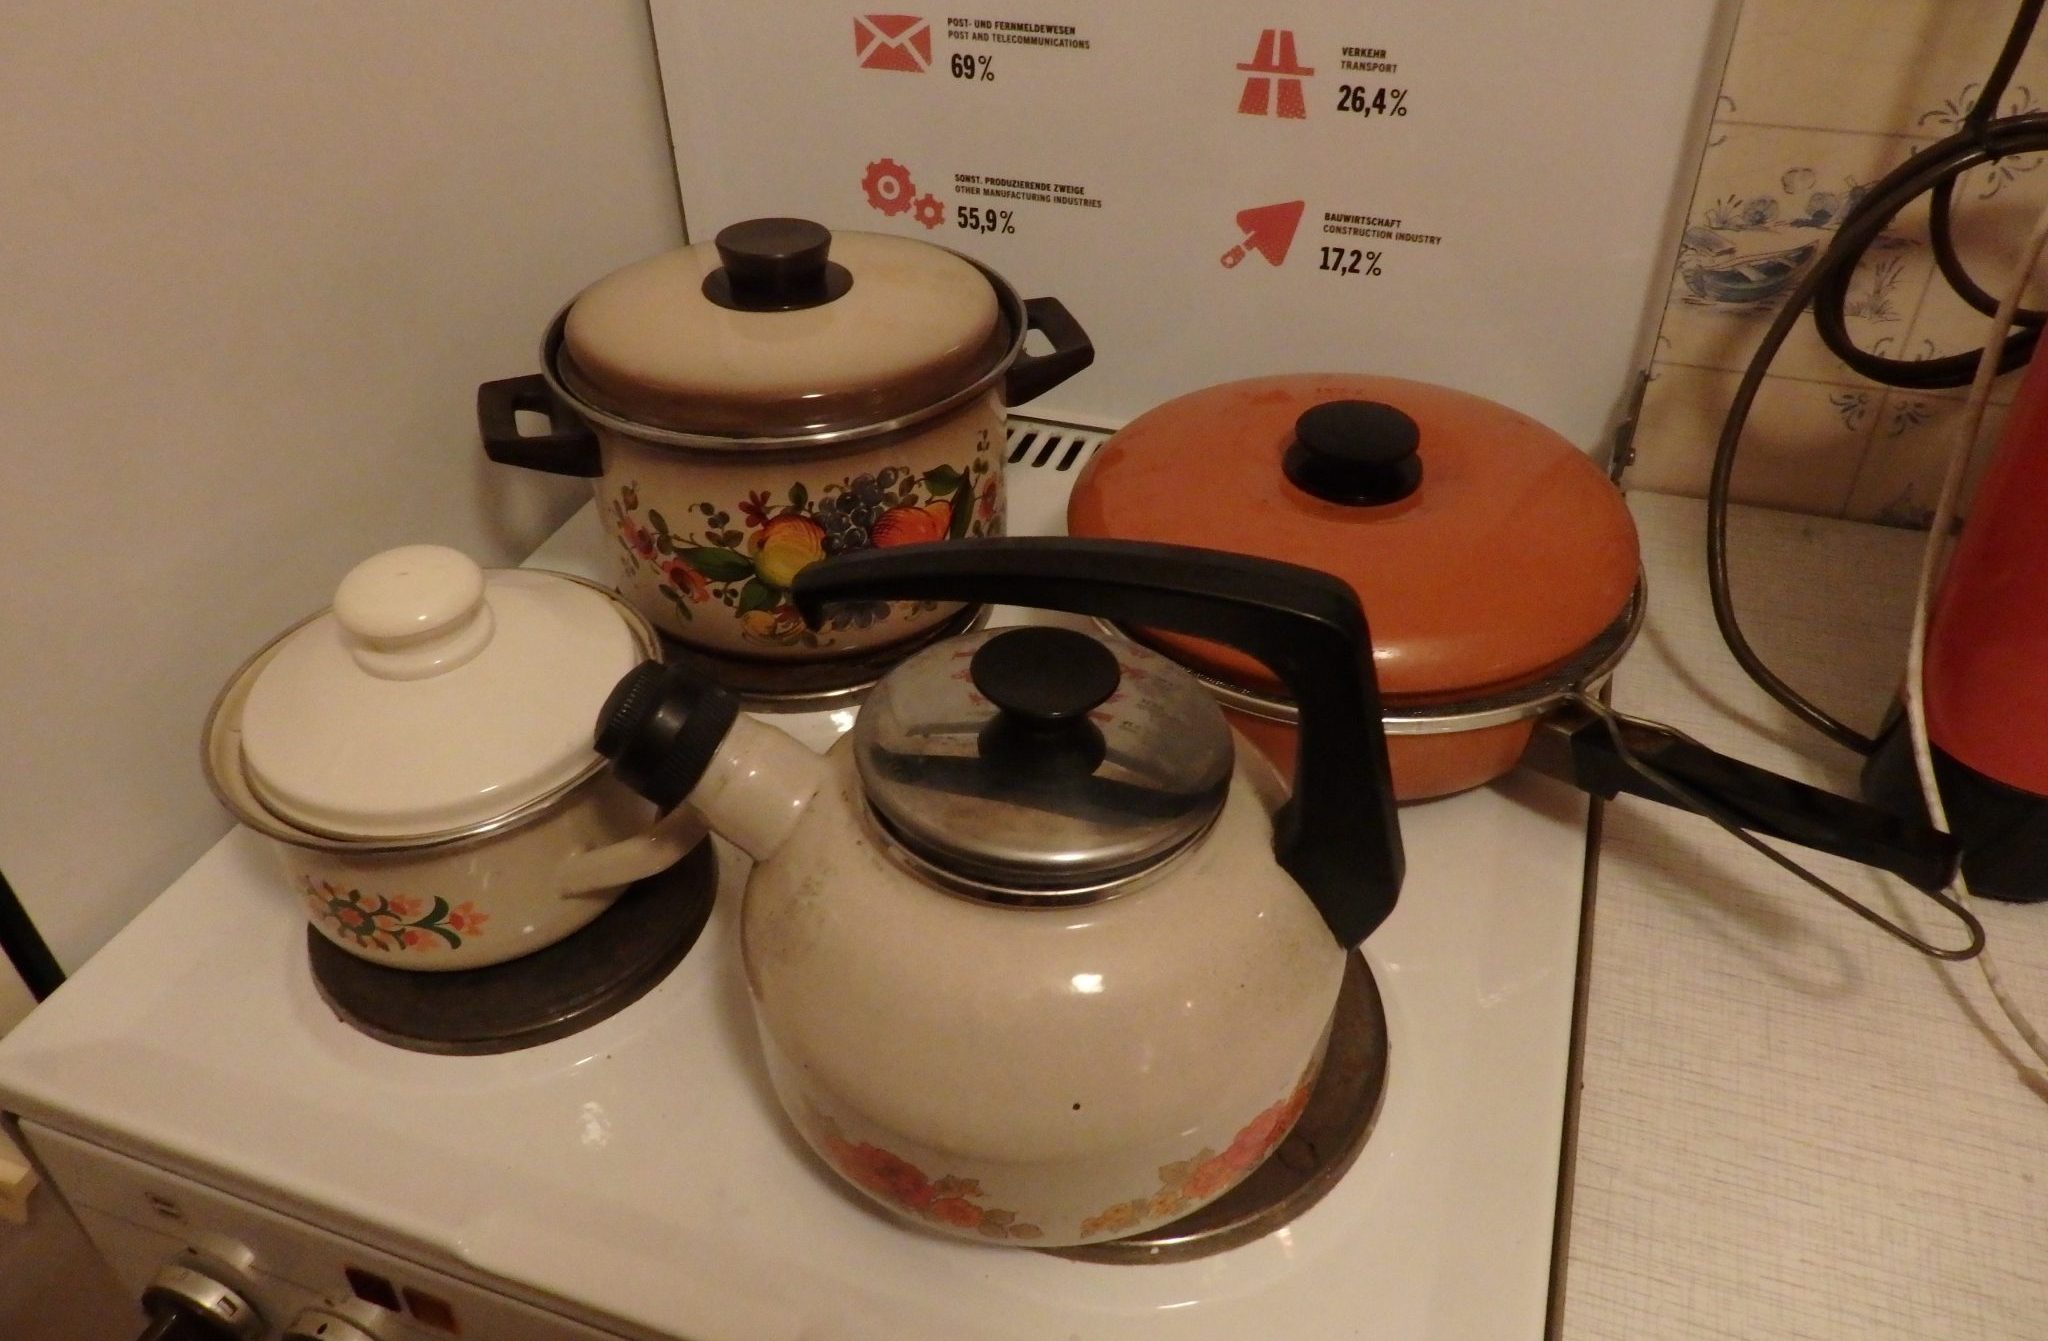 East German cooking utensils in an East German kitchen in the DDR Museum